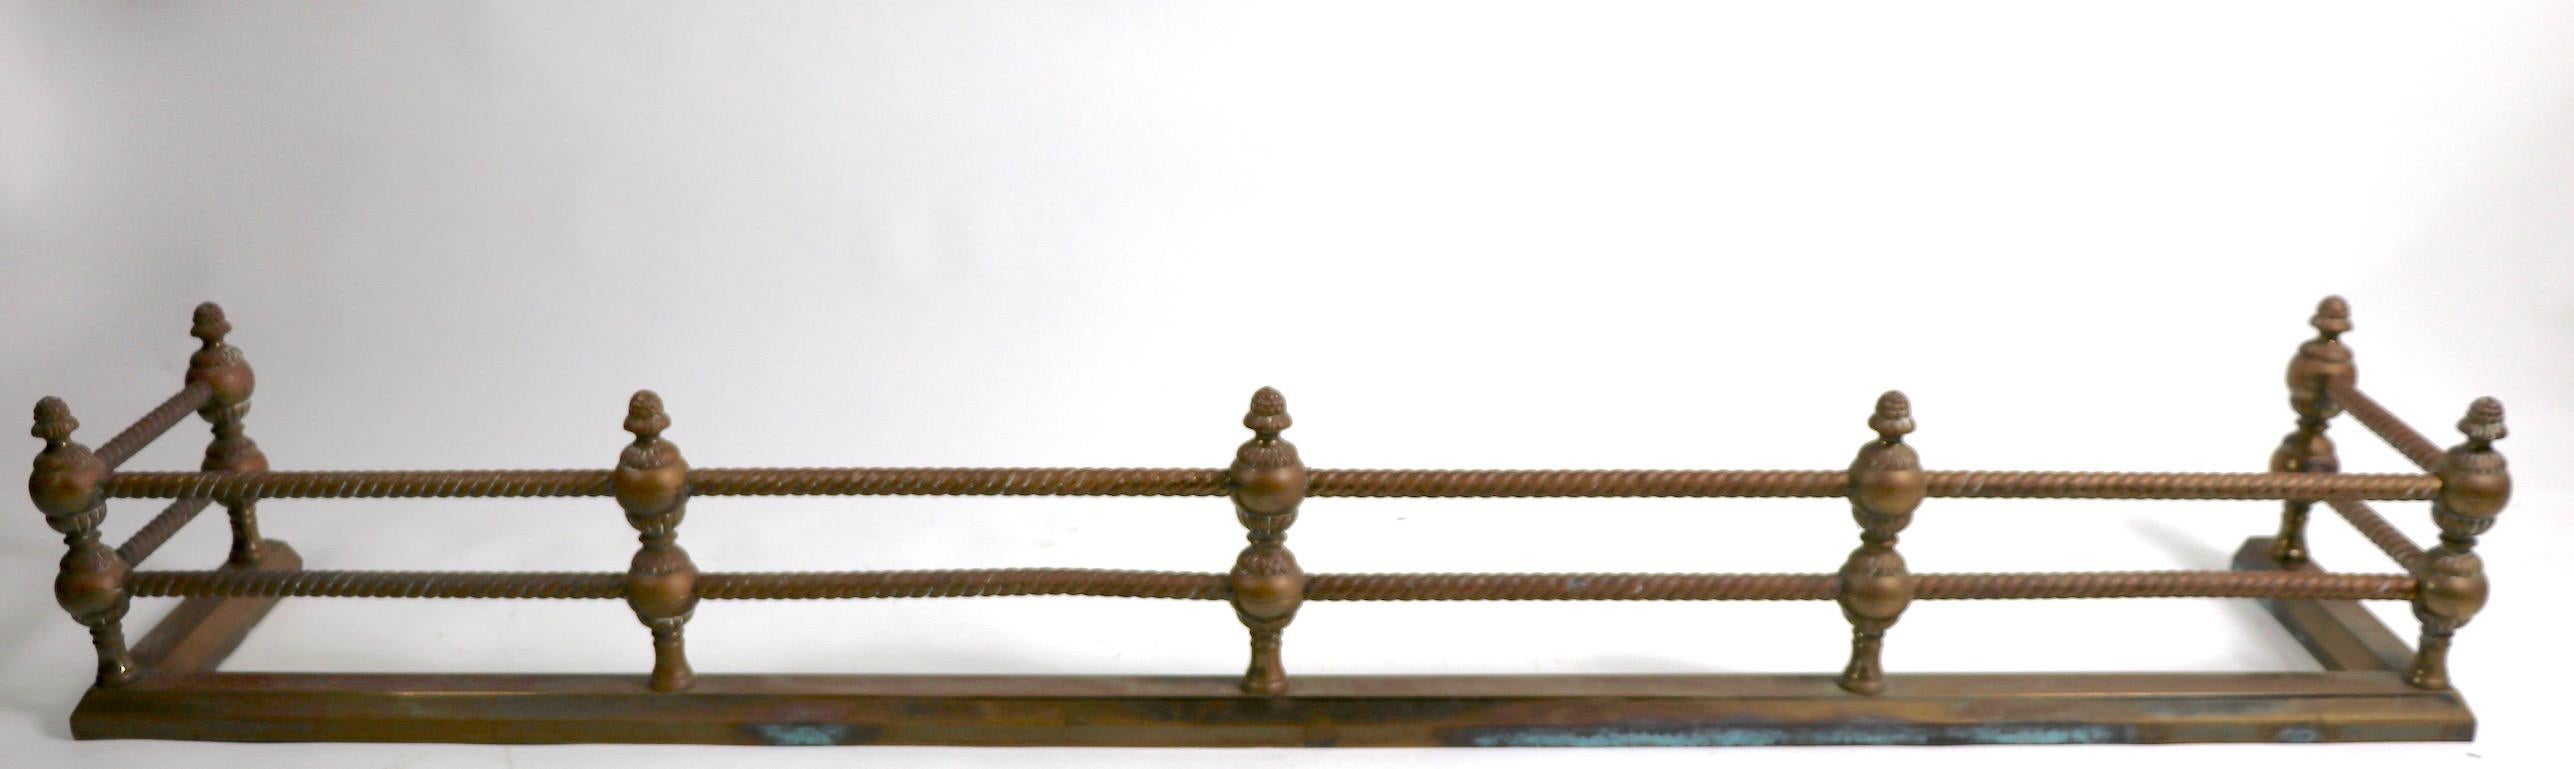 Brass fender, with twisted rail horizontal rods held by classical styled vertical supports. Total H 10 inch, top rail H 8 inches. Finish shows patina and wear, normal and consistent with age. Solid brass construction.